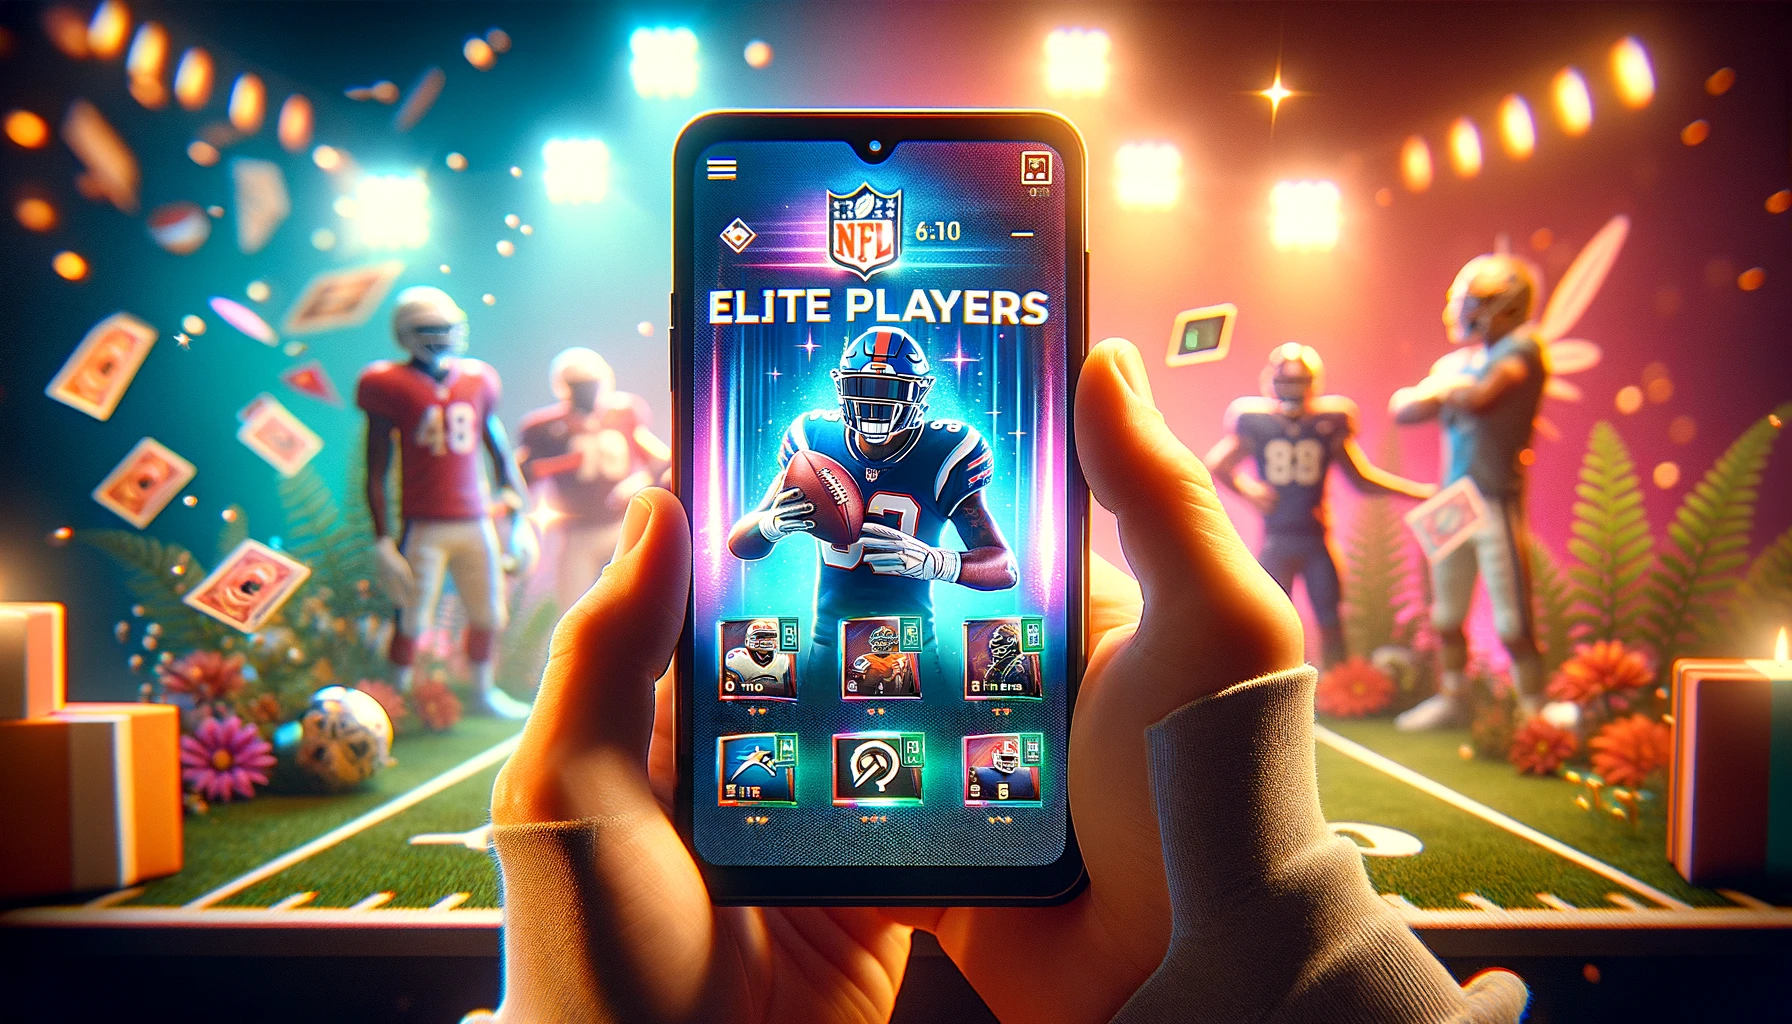 How to Get Elite Players in Madden Mobile